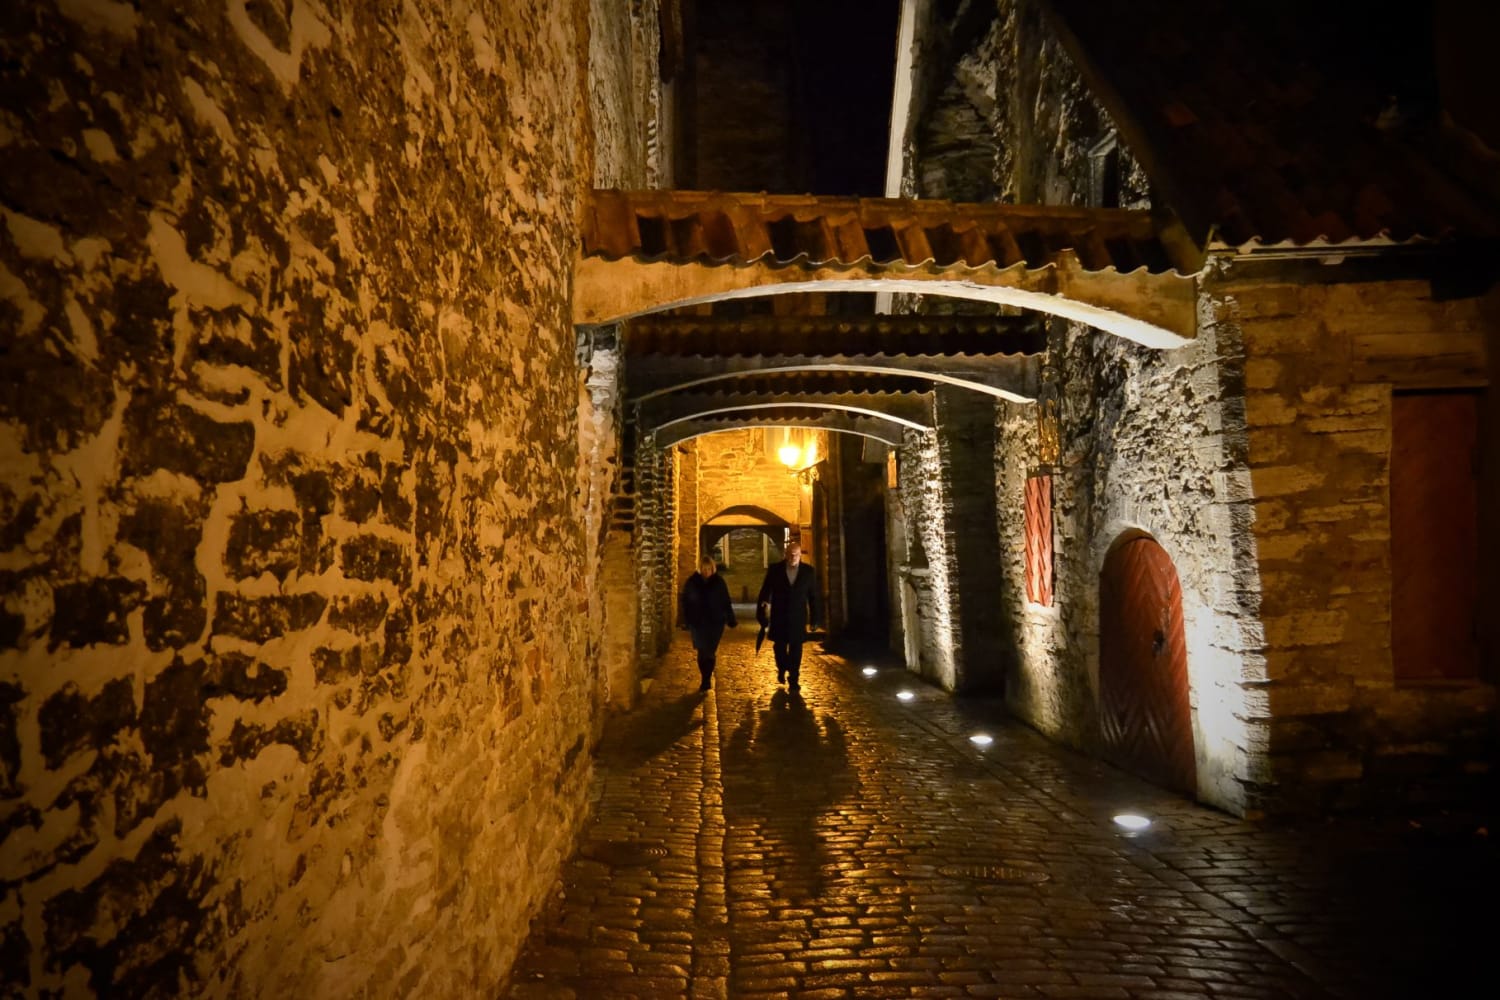 In pictures: Tallinn streets at night